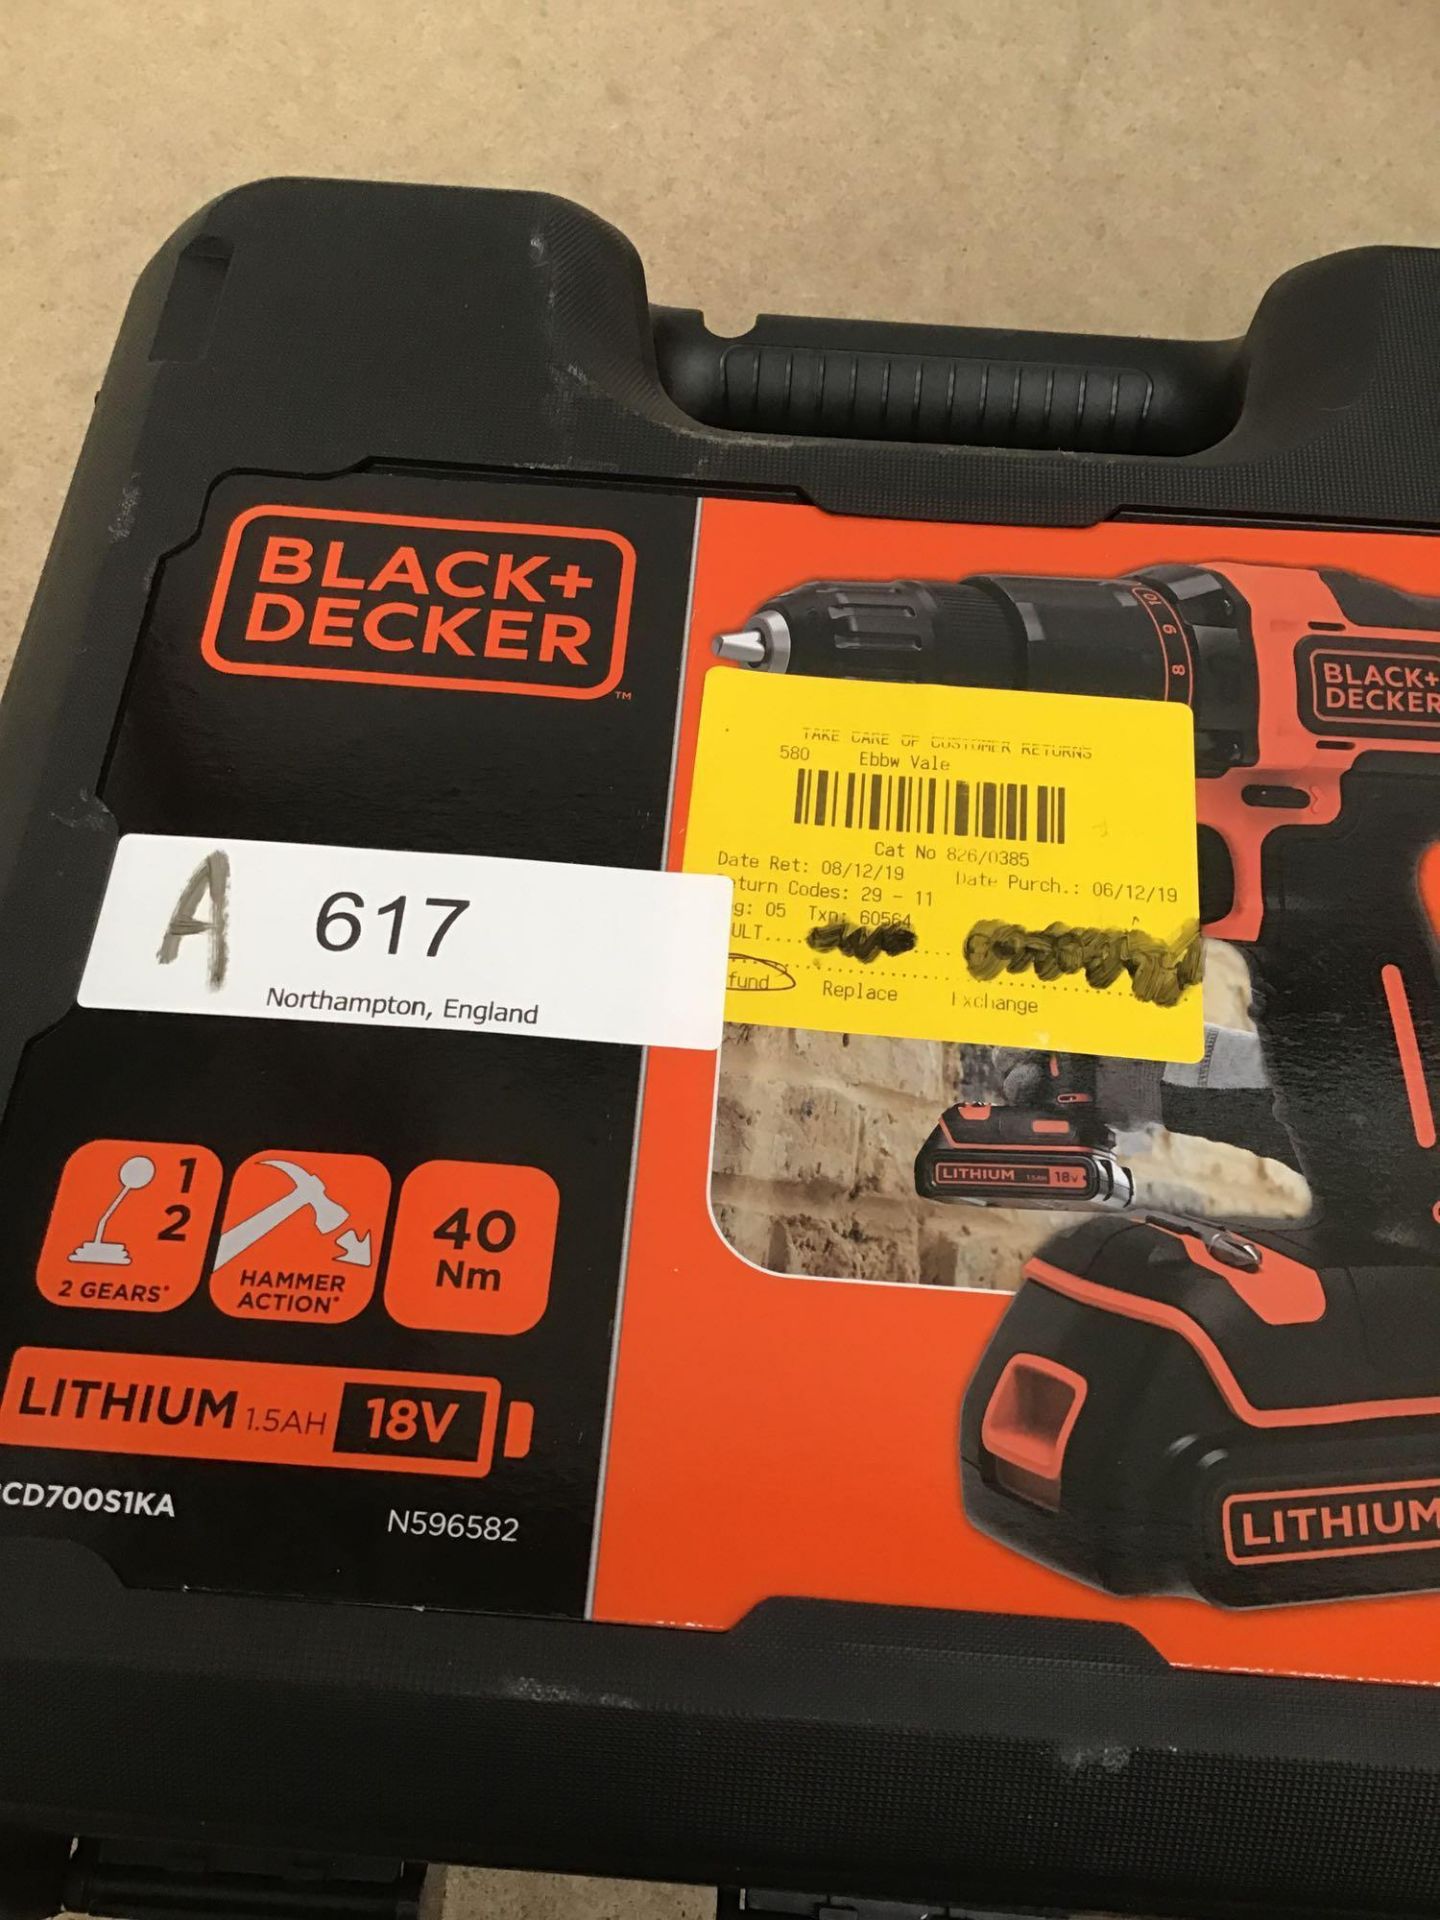 Black + Decker BCD700S1KA Hammer Drill with Battery - 18V - £50.00 RRP - Image 5 of 5